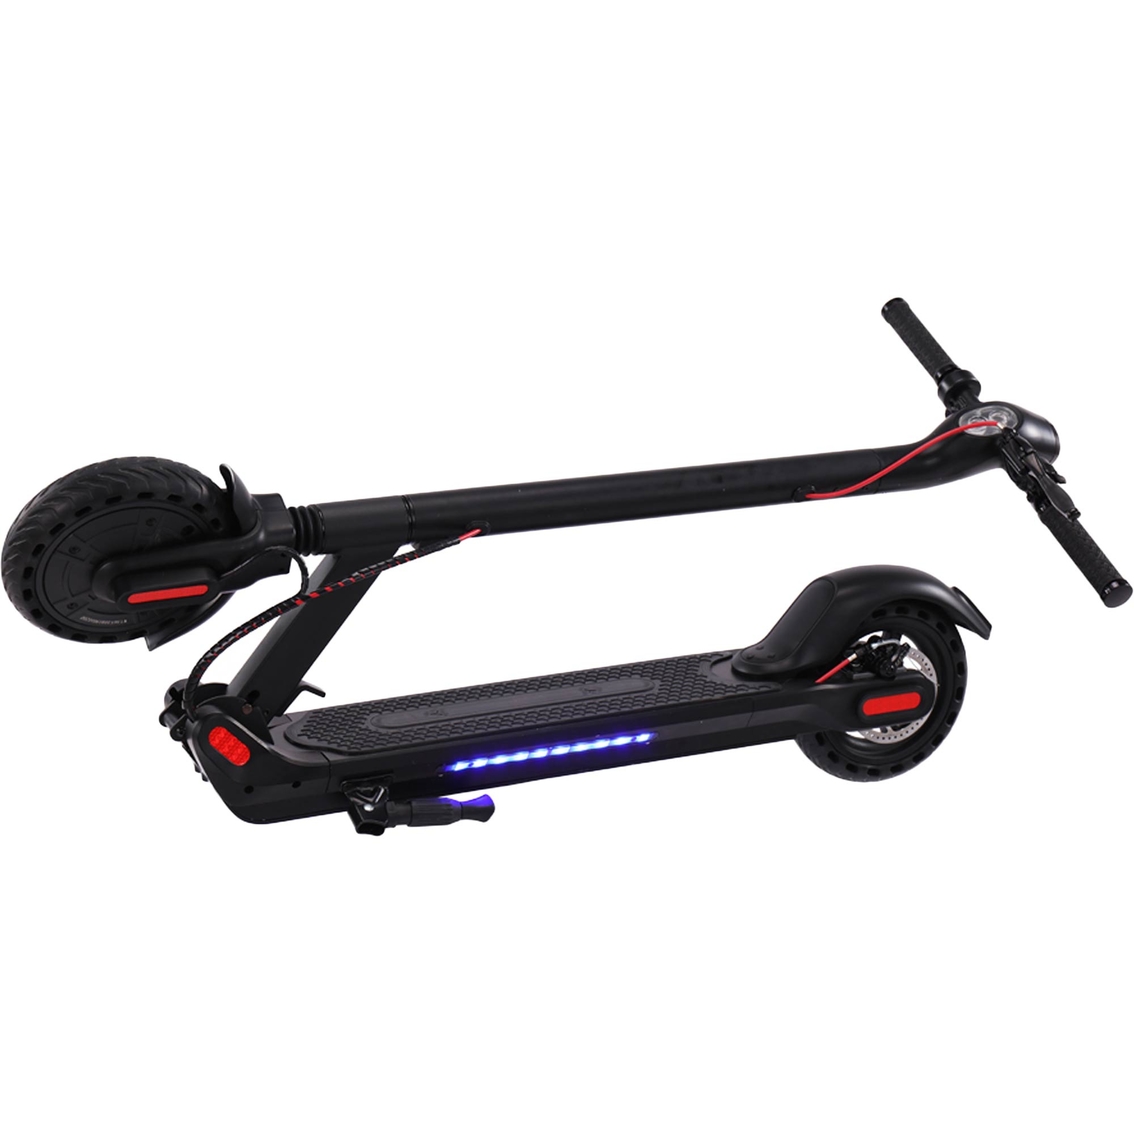 GlareWheel Electric Scooter 300W High Speed APP Control Foldable Pro S10 - Image 5 of 10